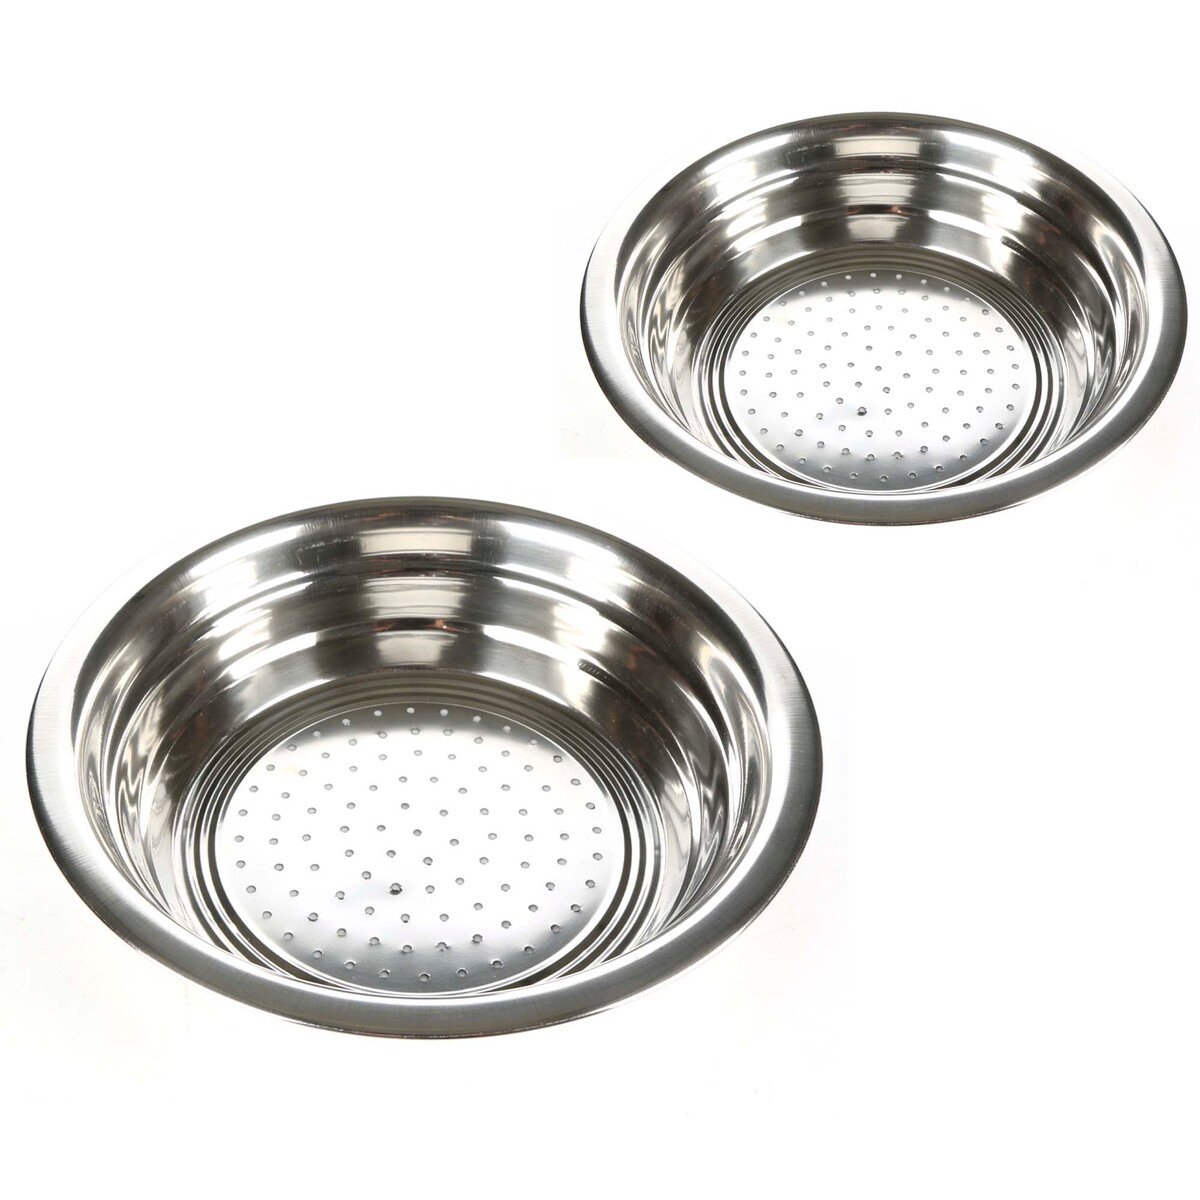 Ethical Stainless Steel Strainers 2Pcs